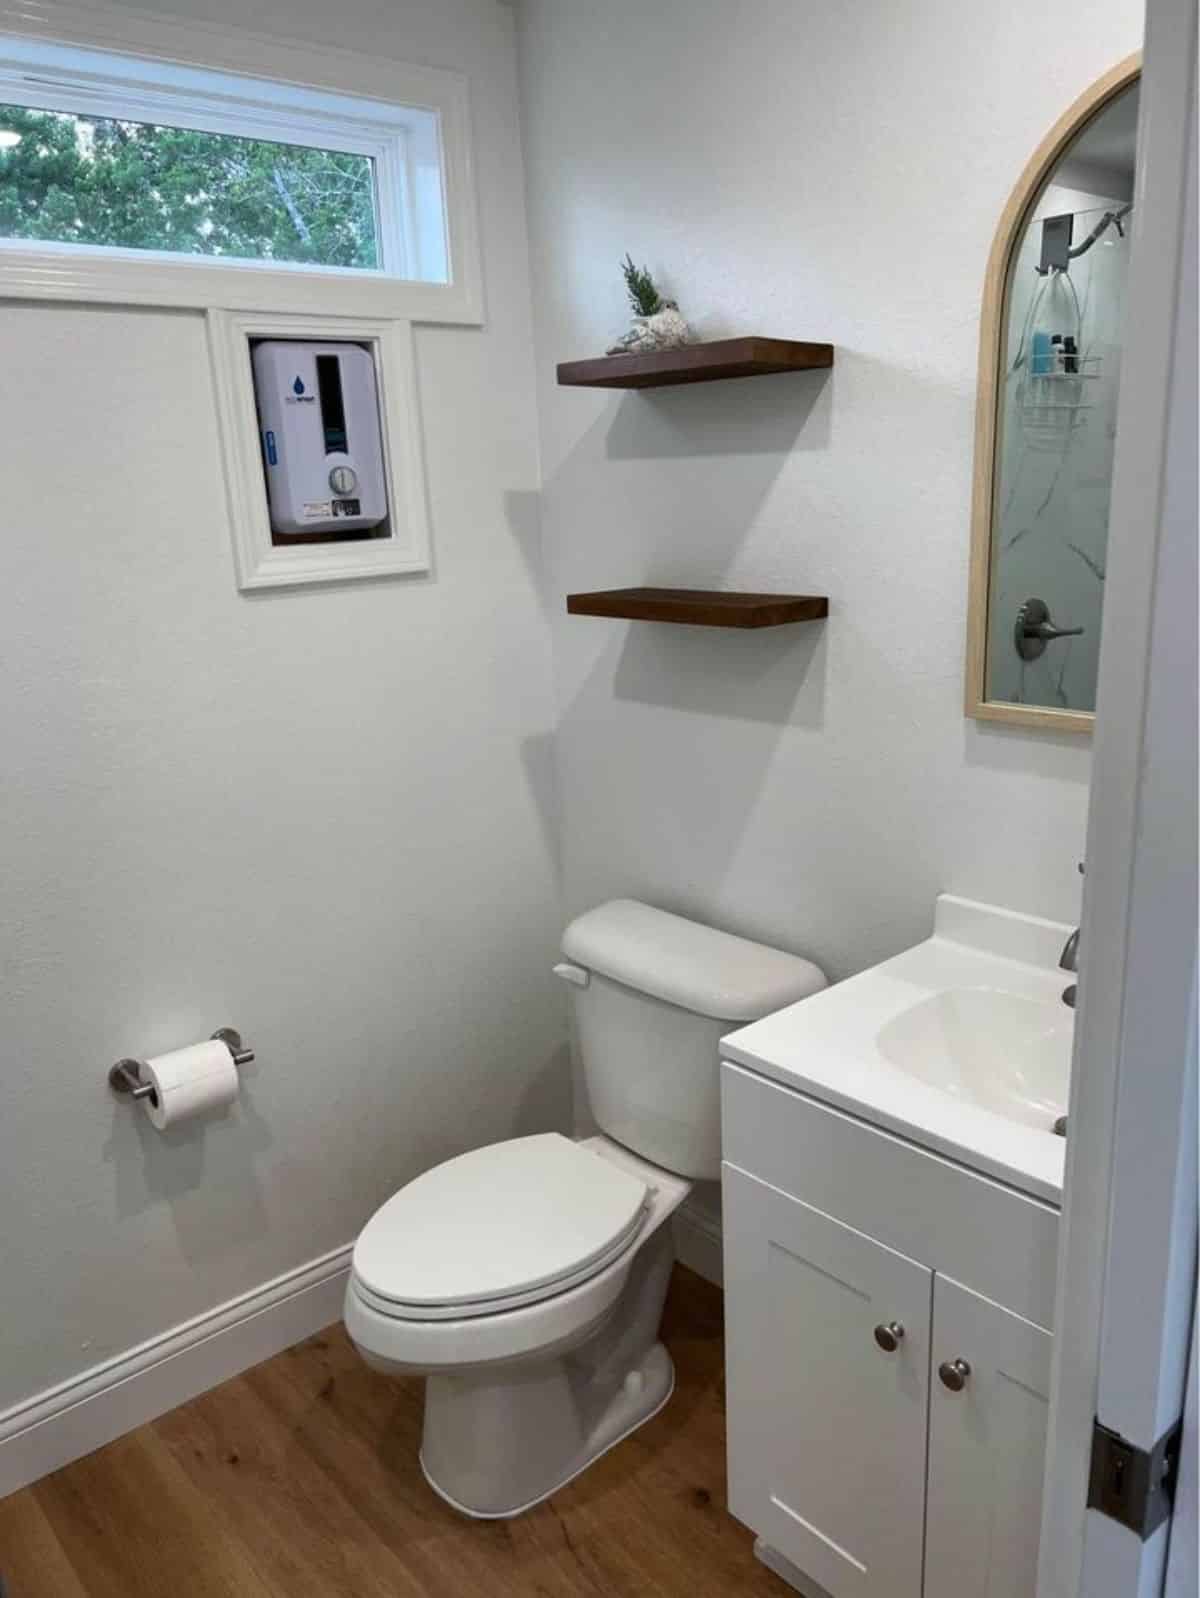 wooden shelves installed in the bathroom above the standard toilet